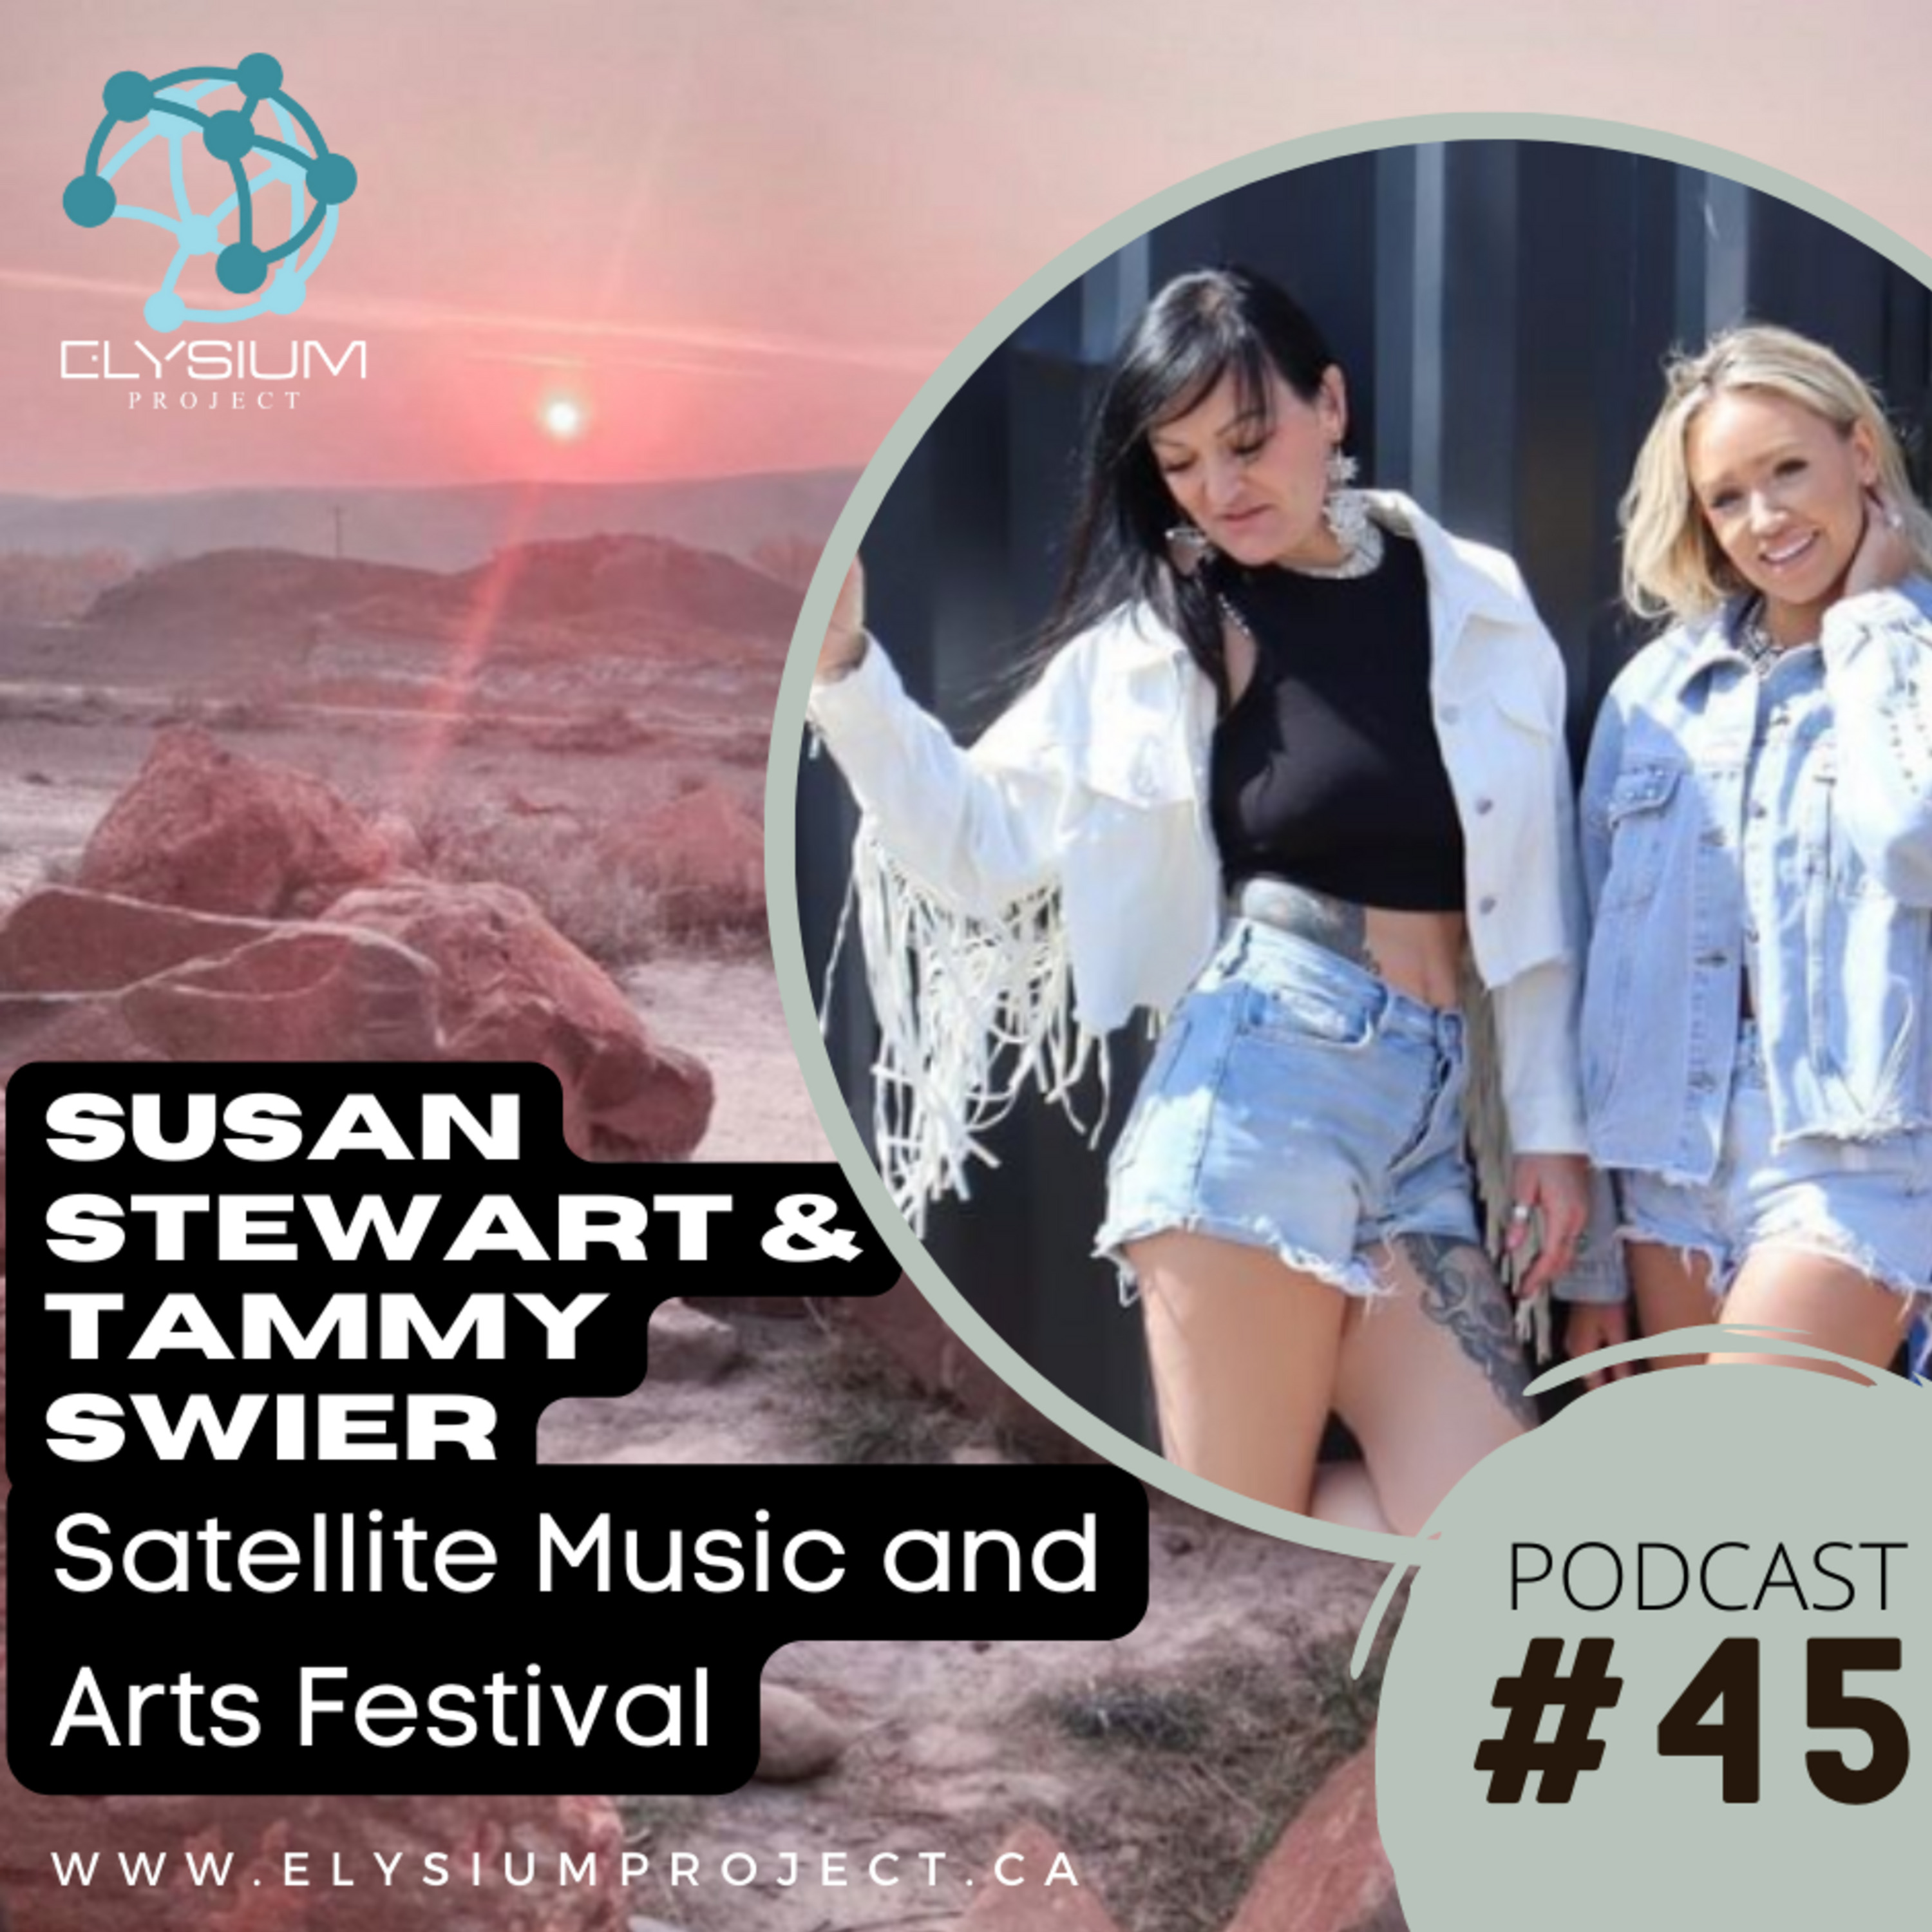 Episode 45: Satellite Music and Arts Festival with Susan Stewart and Tammy Swier